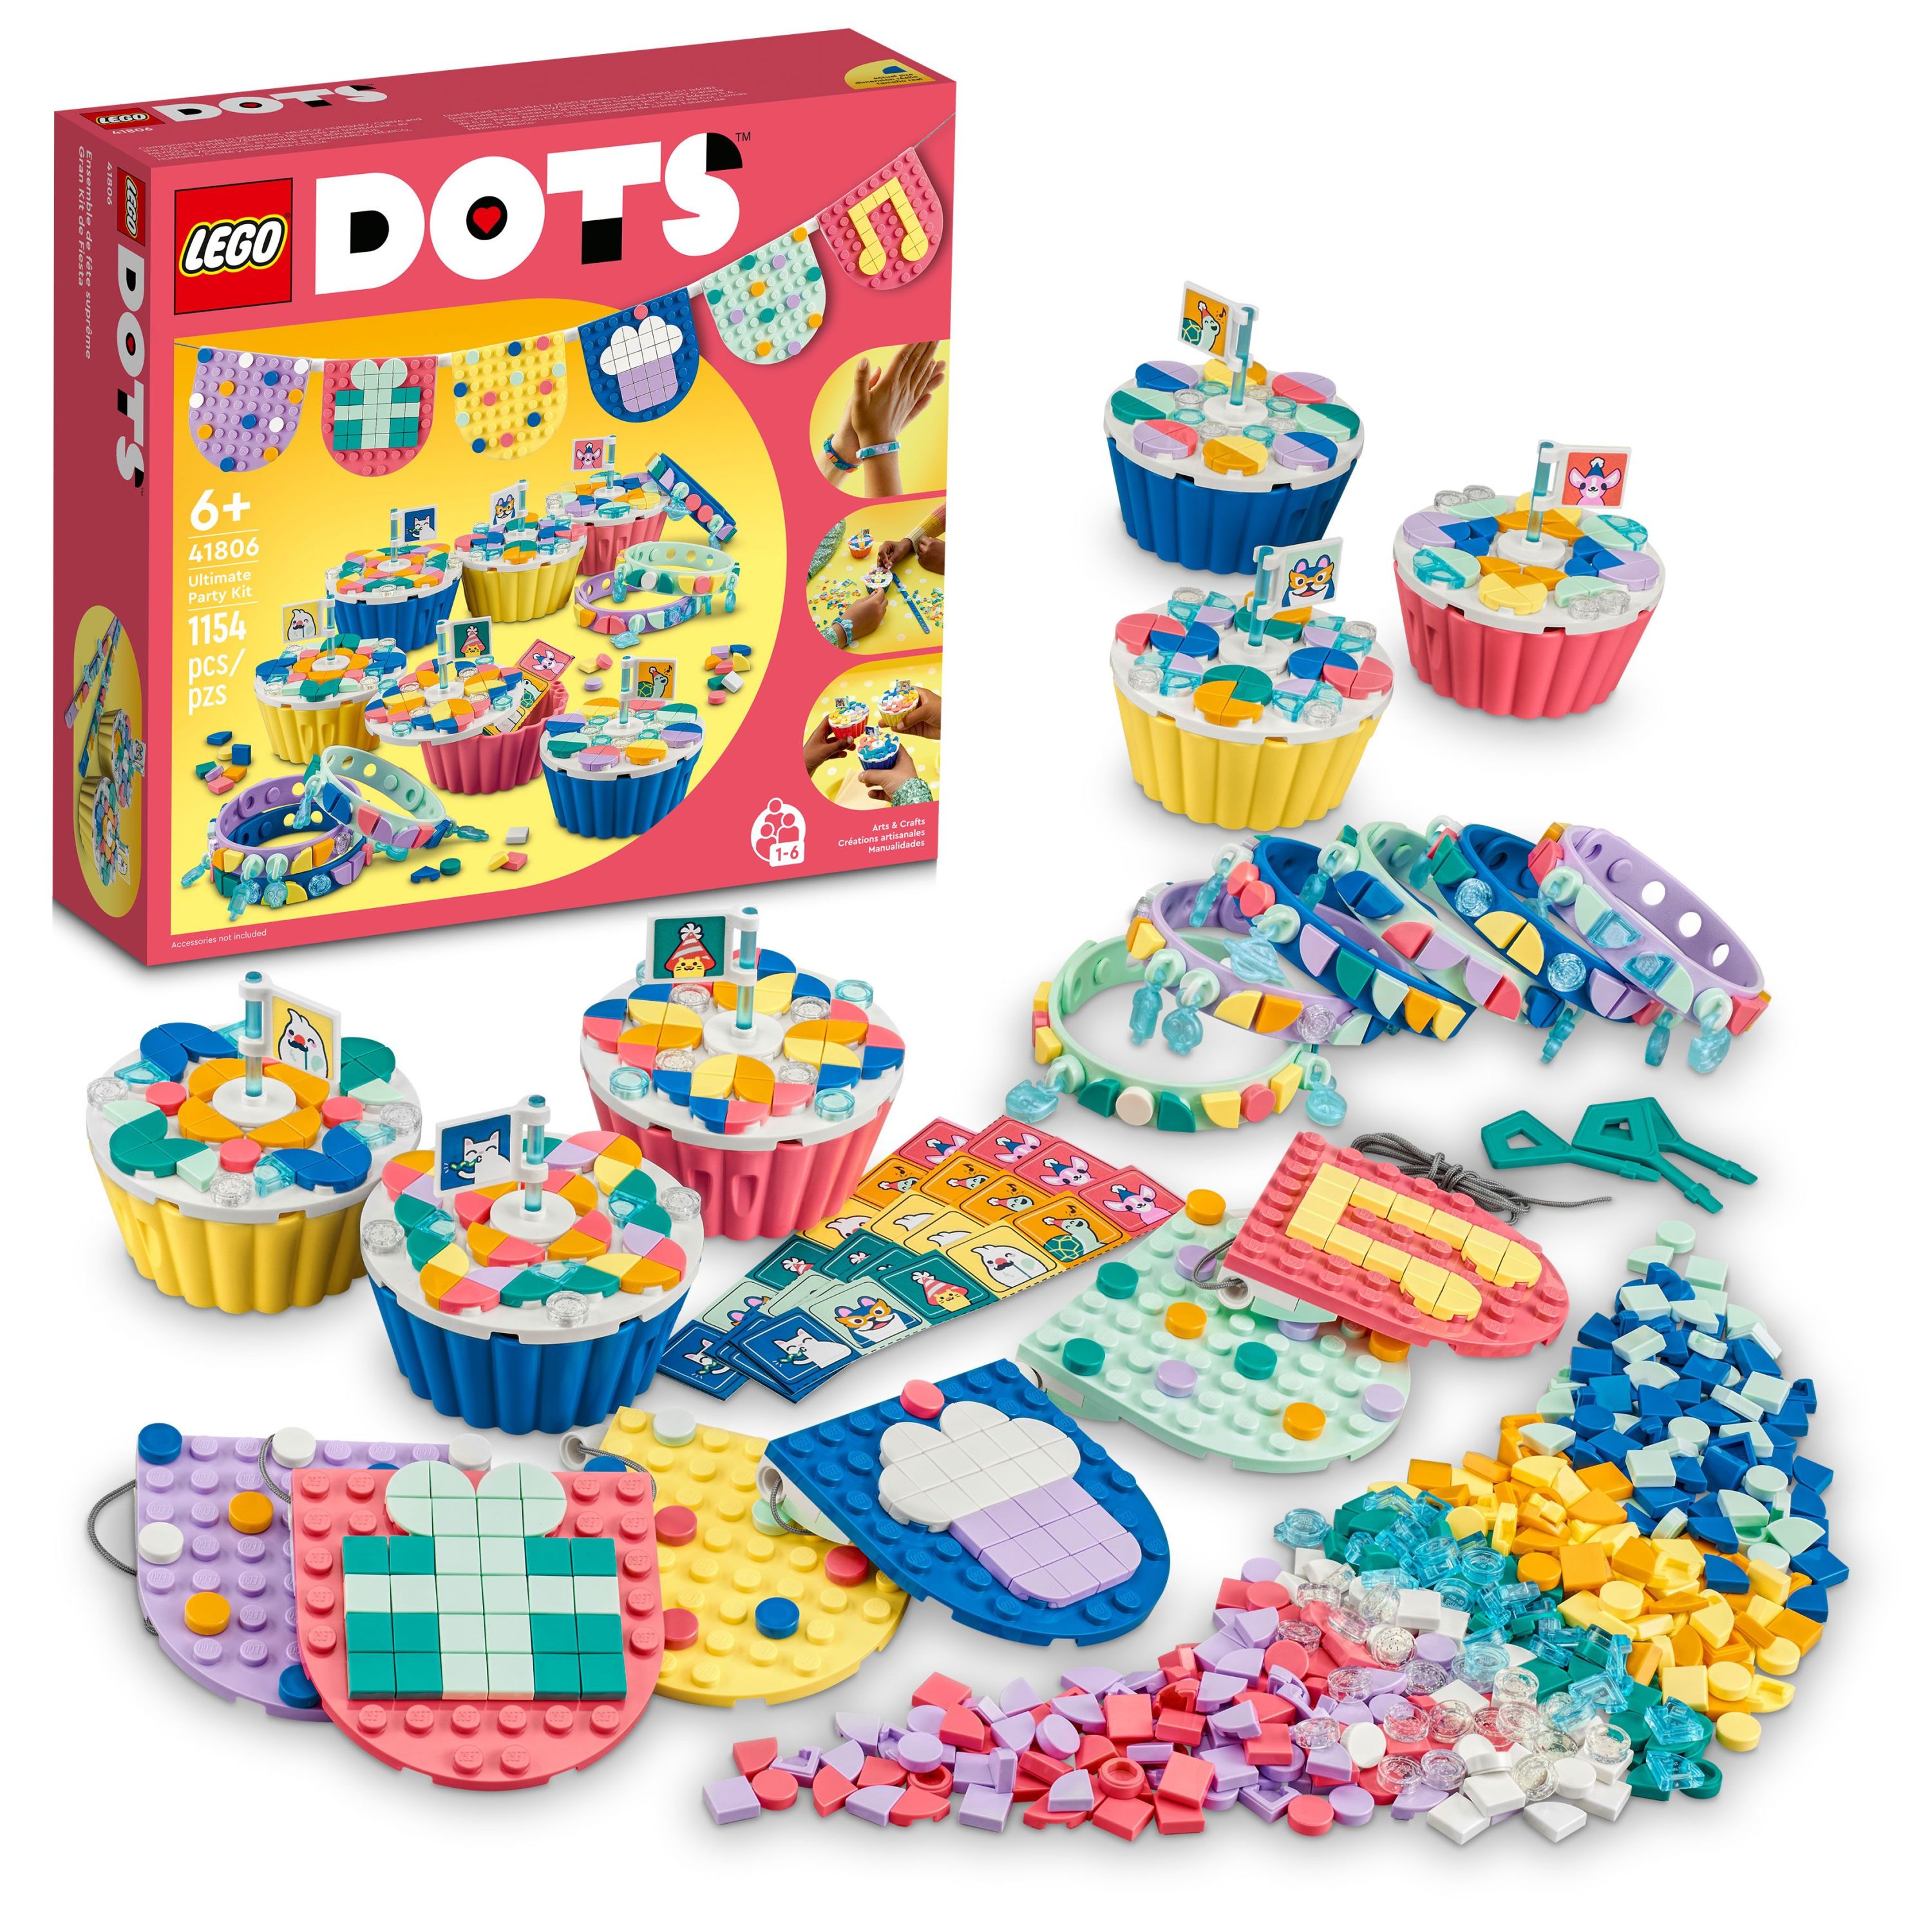 LEGO DOTS Ultimate Party Kit 41806, Arts &amp; Crafts Birthday Party Games or DIY Party Bag Fillers with Toy Cupcakes, Best Friend Bracelets, and Bunting, Creative Gifts for Kids - Walmart.com 降价